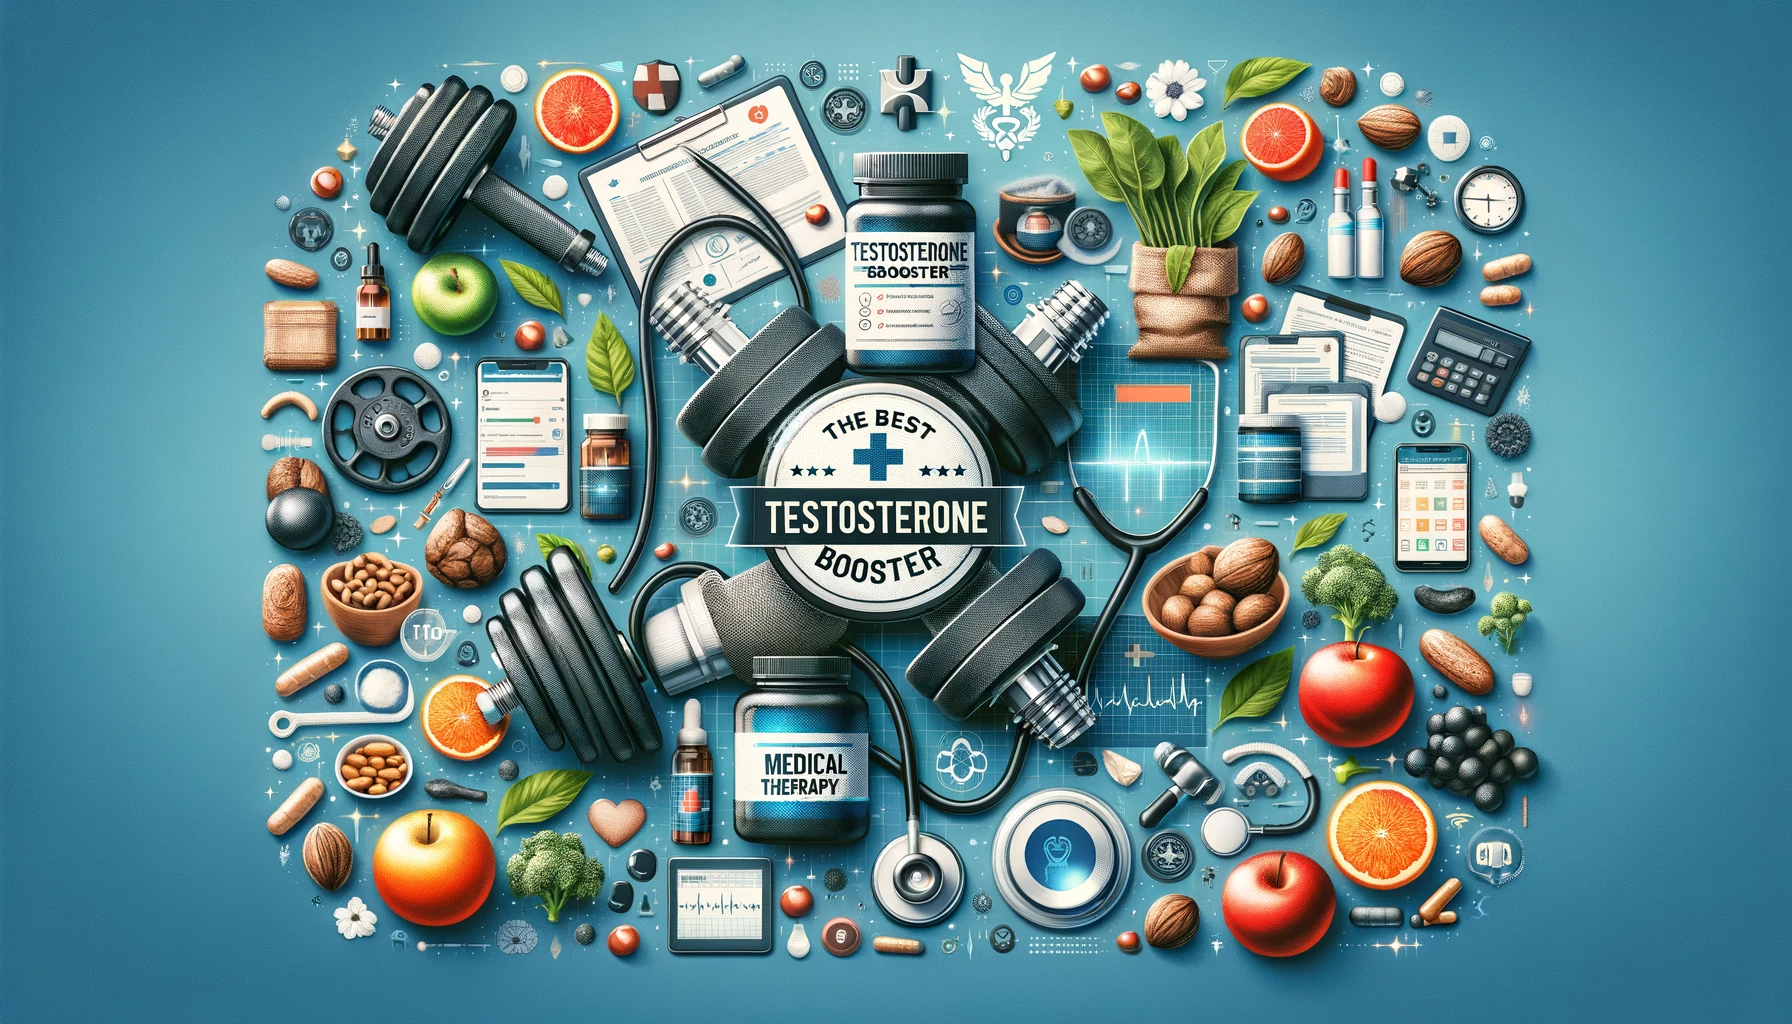 Beyond Supplements: What Really Constitutes the Best Testosterone Booster?